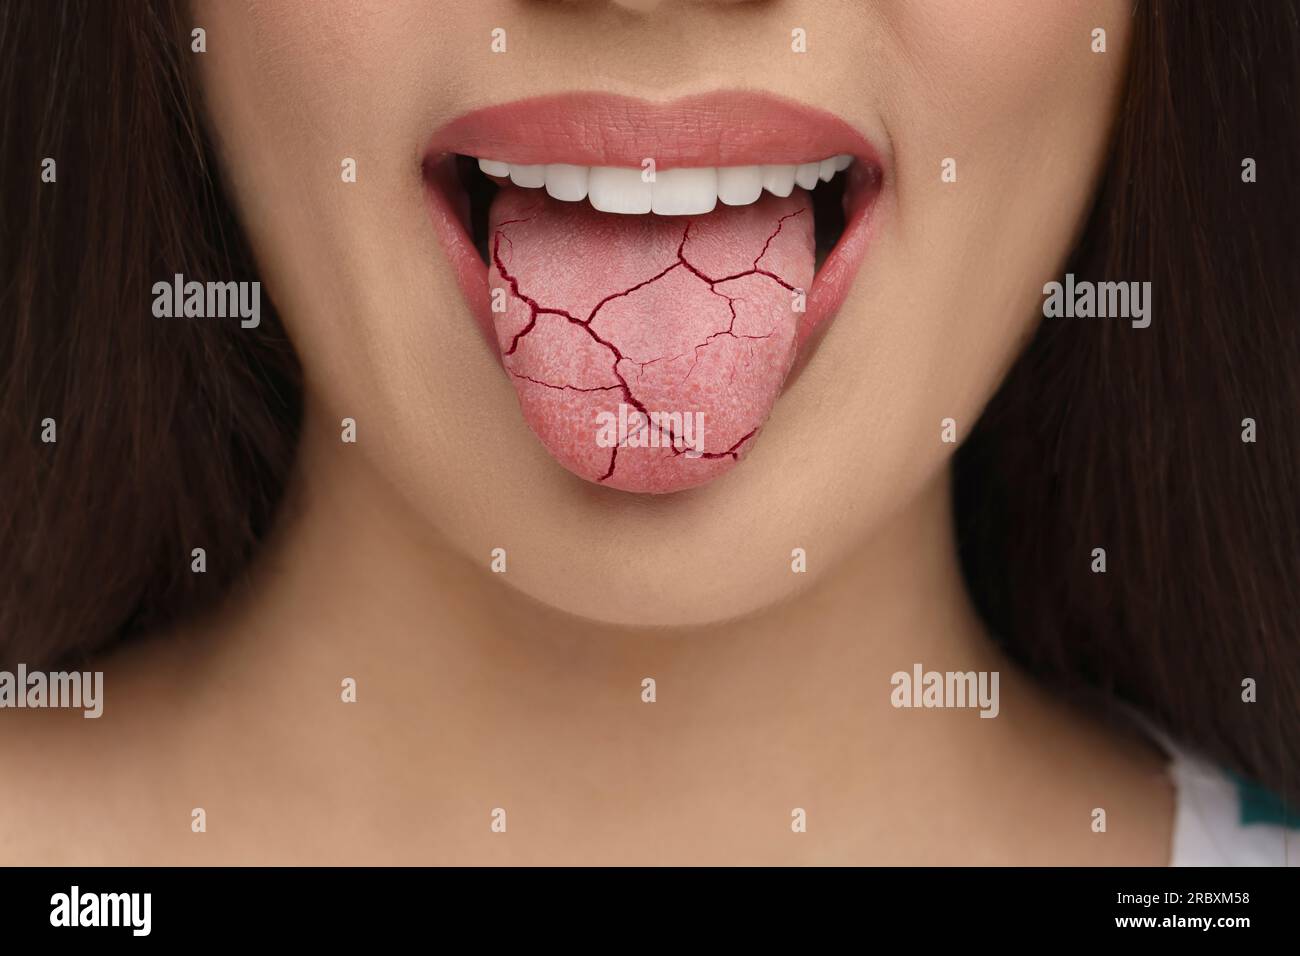 Dry mouth symptom. Woman showing dehydrated tongue, closeup Stock Photo